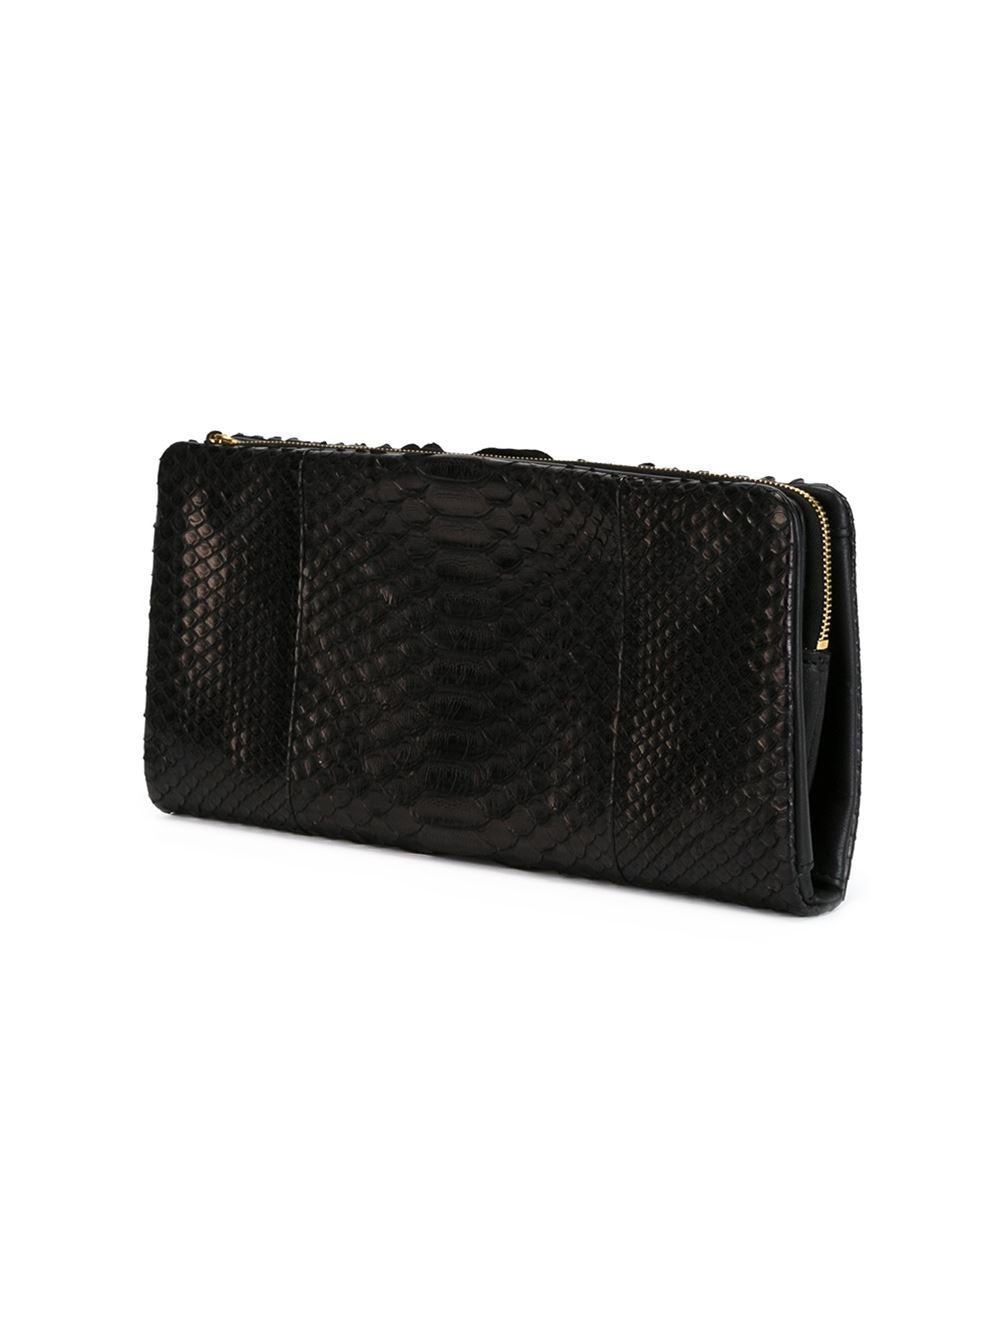 This black python skin evening clutch from Céline features an all around zip fastening, a snap button closure, internal zipped pockets and an embossed internal logo stamp.

Colour: Black

Material: Python

Measurements: width: 28 centimetres,